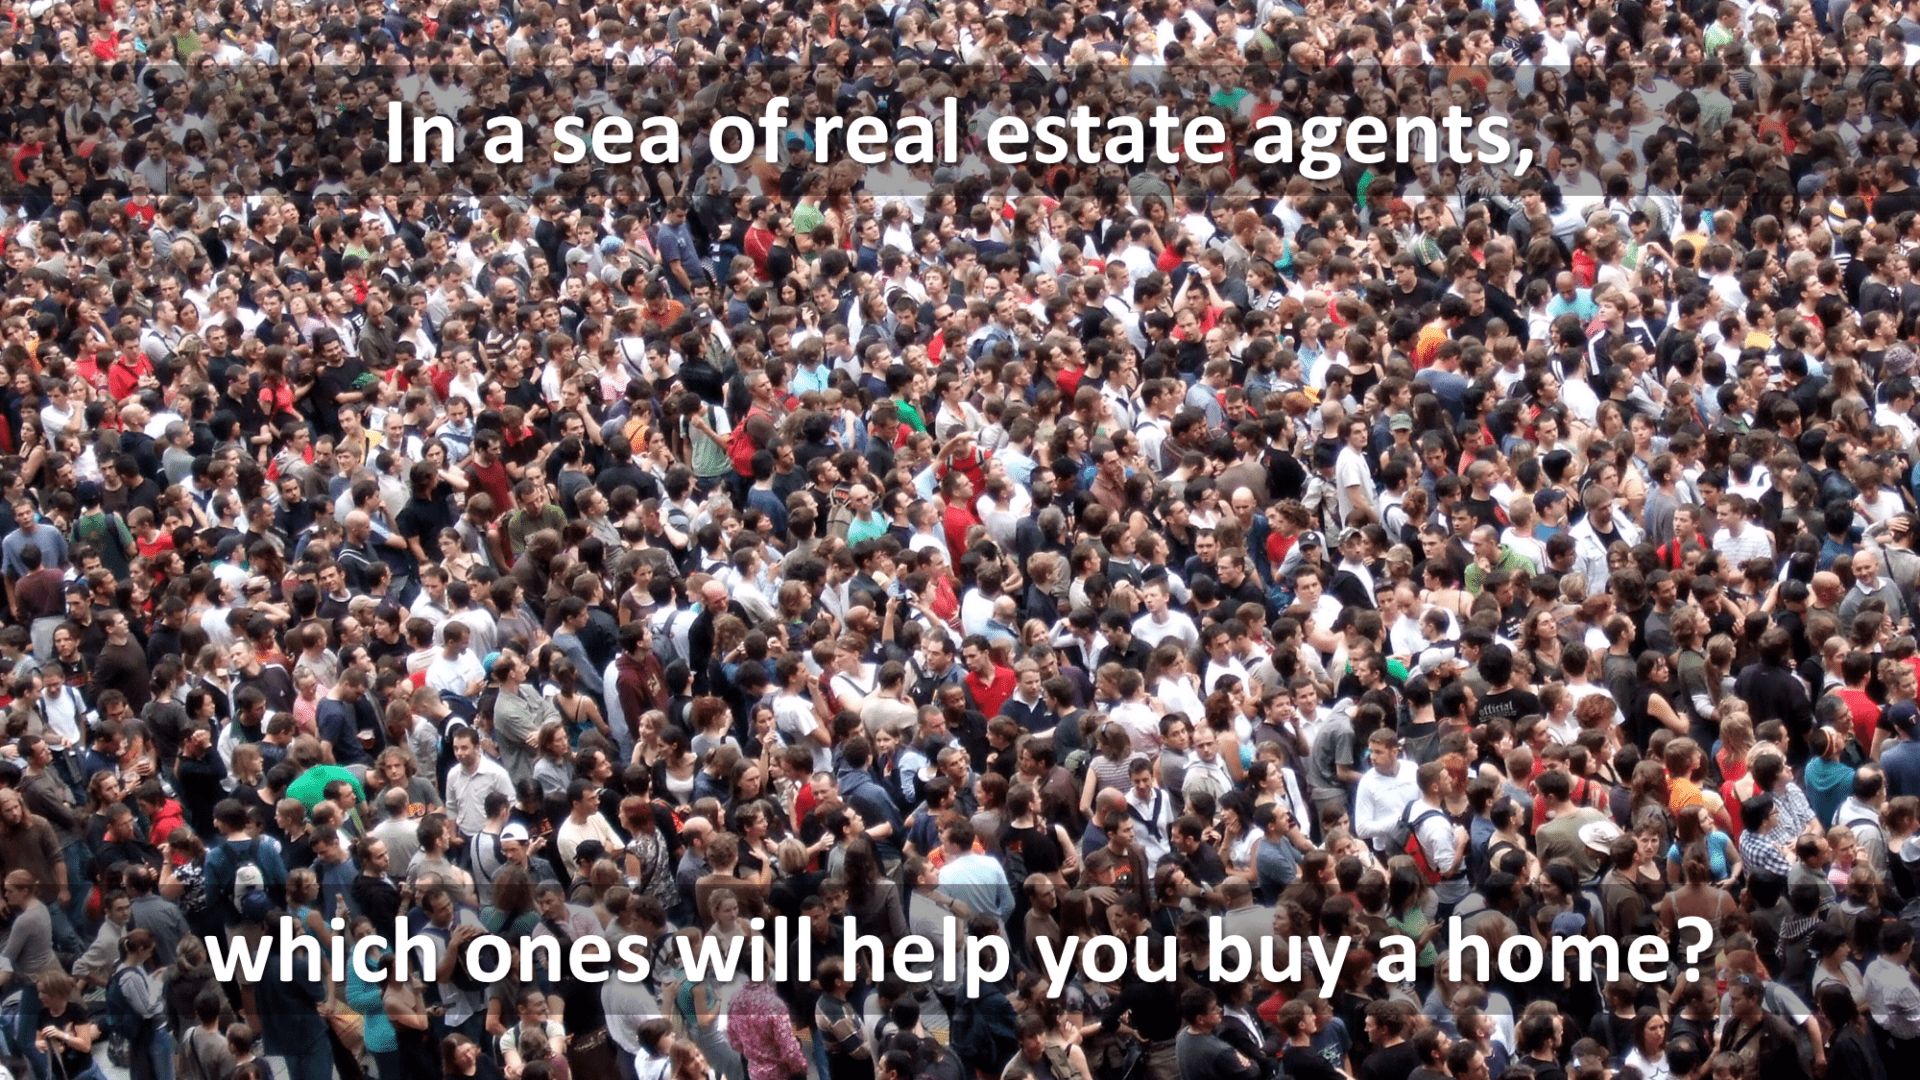 In a sea of real estate agents, which ones will help you buy your next home?